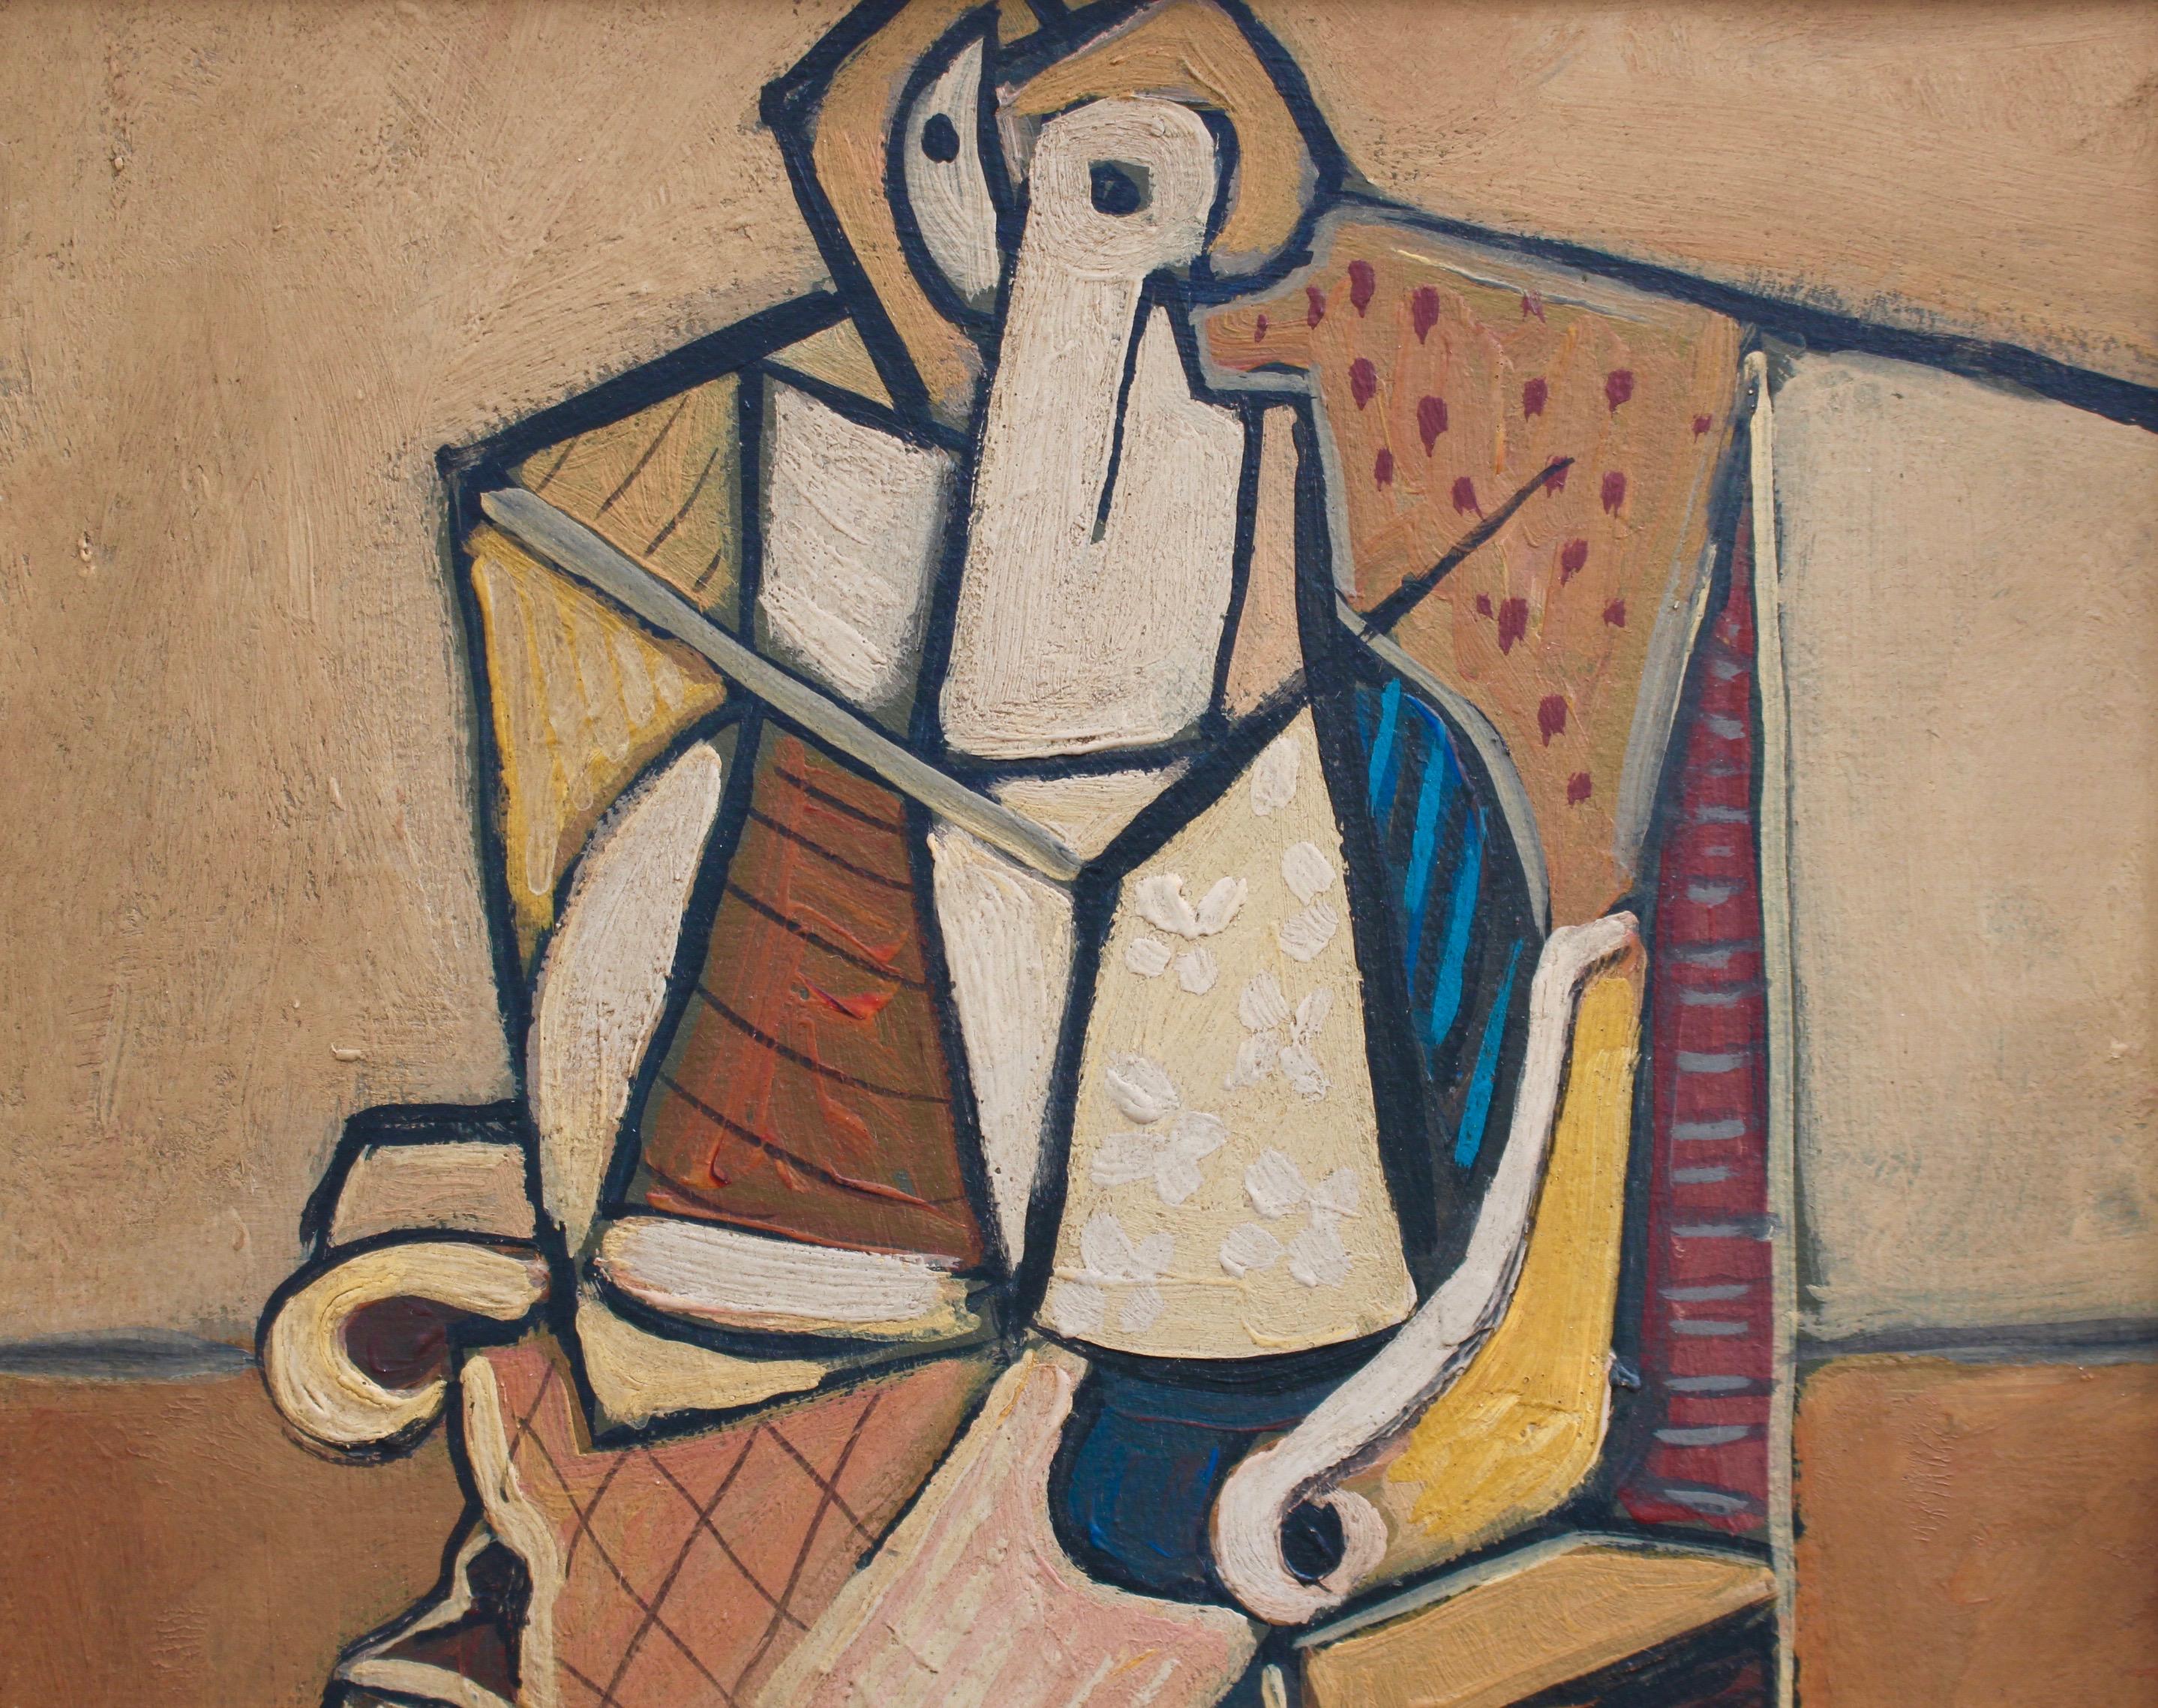 'Seated Abstract Figure', oil on board, by J.G. (circa 1940s - 1960s). This artwork depicts a seated figure consisting of bold lines, geometric shapes and muted hues. The flat planes of colour and complex puzzle-like compositions echo the